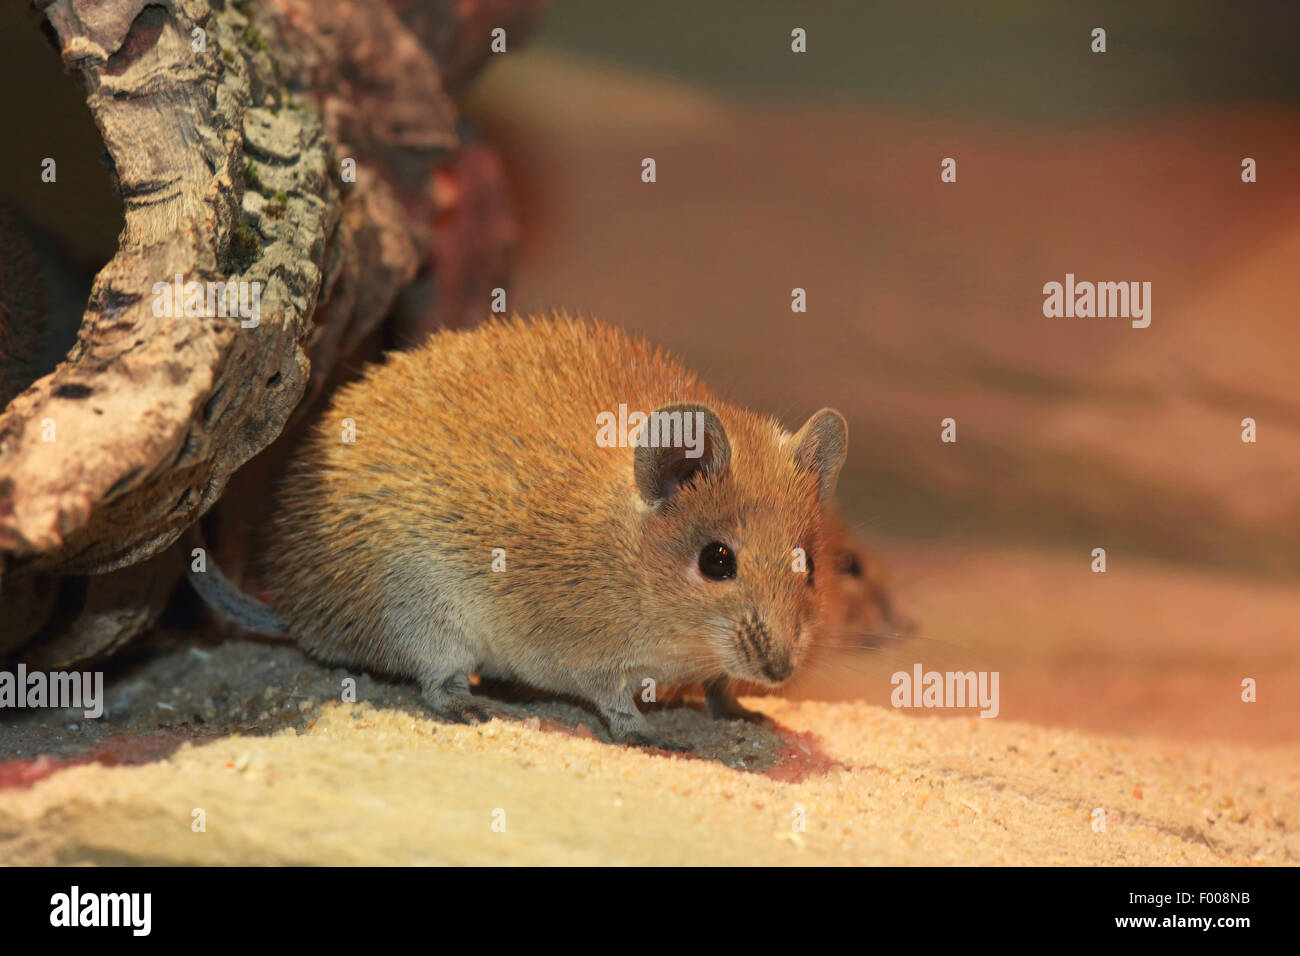 Golden Spring Mouse (Acomys russatus), sitting in the sand Stock Photo